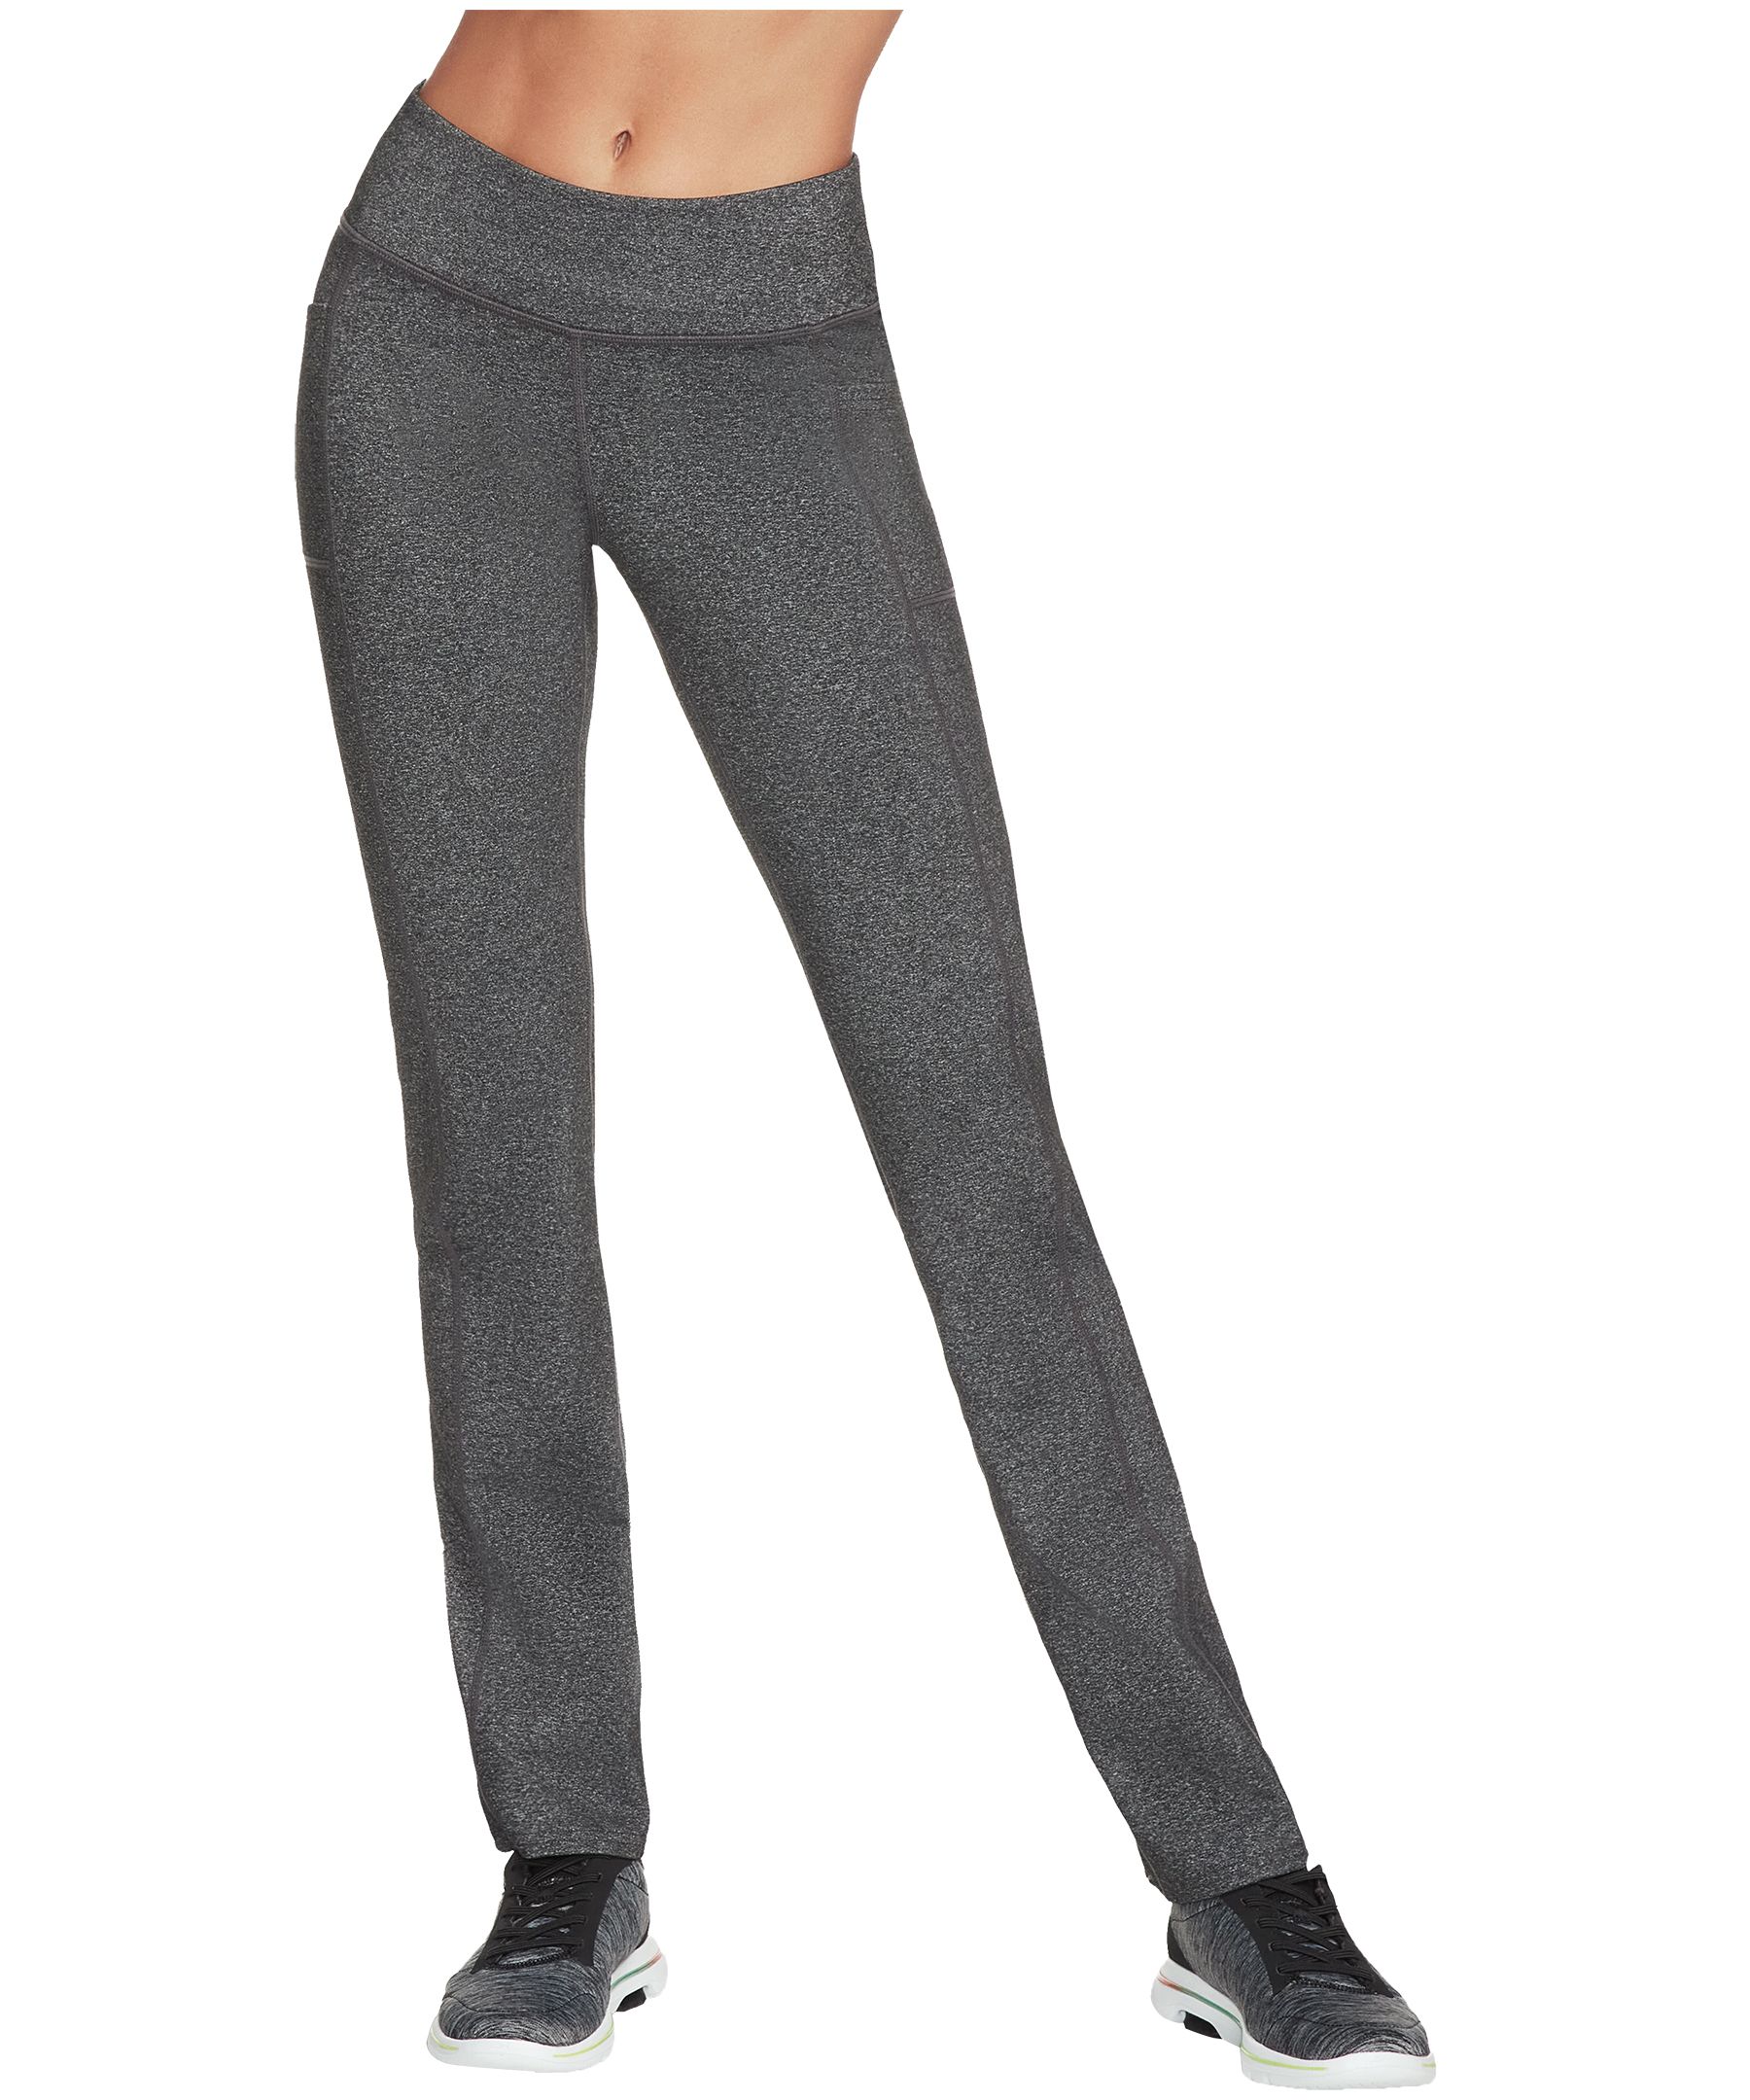 Shambhala Women's Mid Rise Live-In Comfort Fitted Jogger Pants